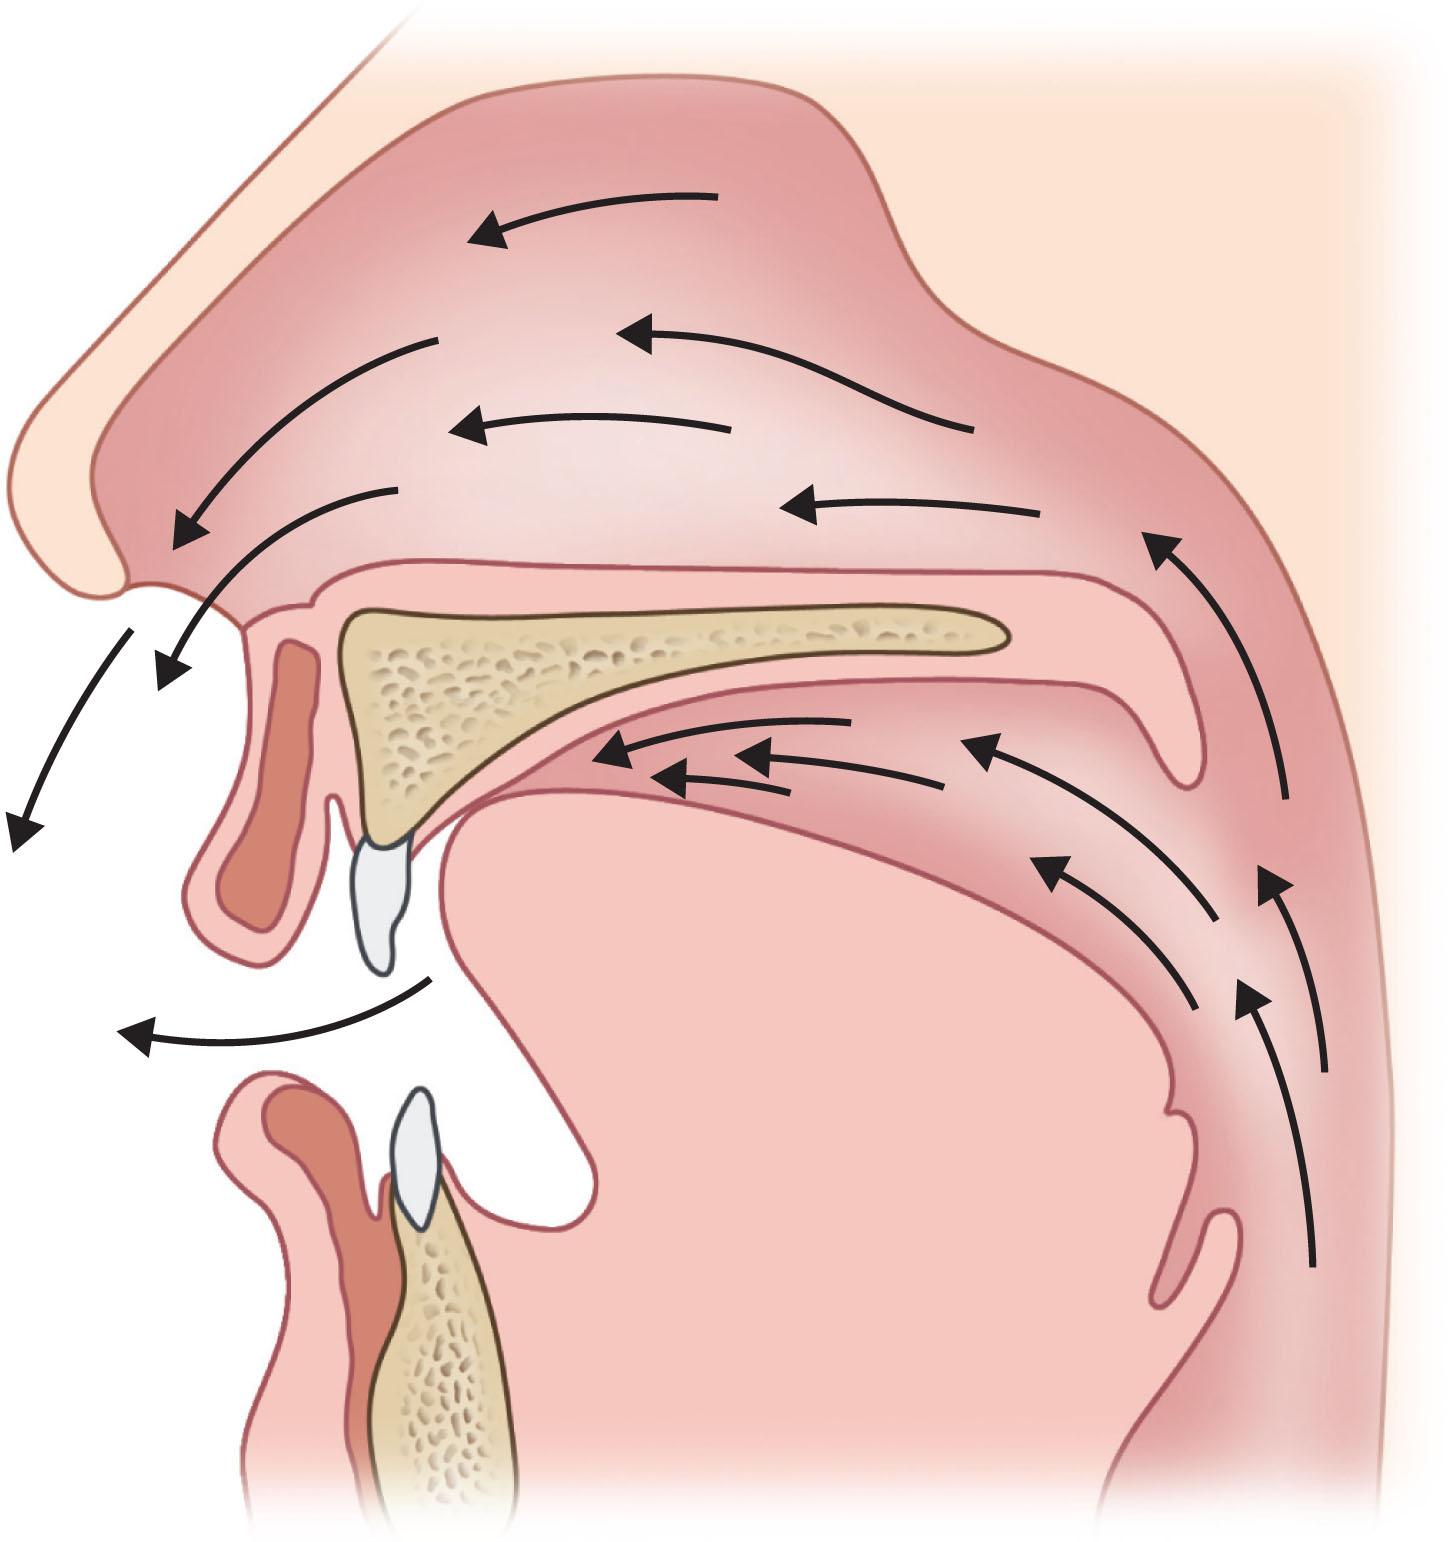 Figure 21.9.5, Lateral view of inadequate velopharyngeal closure for speech due to a short soft palate (velopharyngeal insufficiency). The arrows represent the escape of air, pressure, and acoustic energy through the nasal cavity during speech.